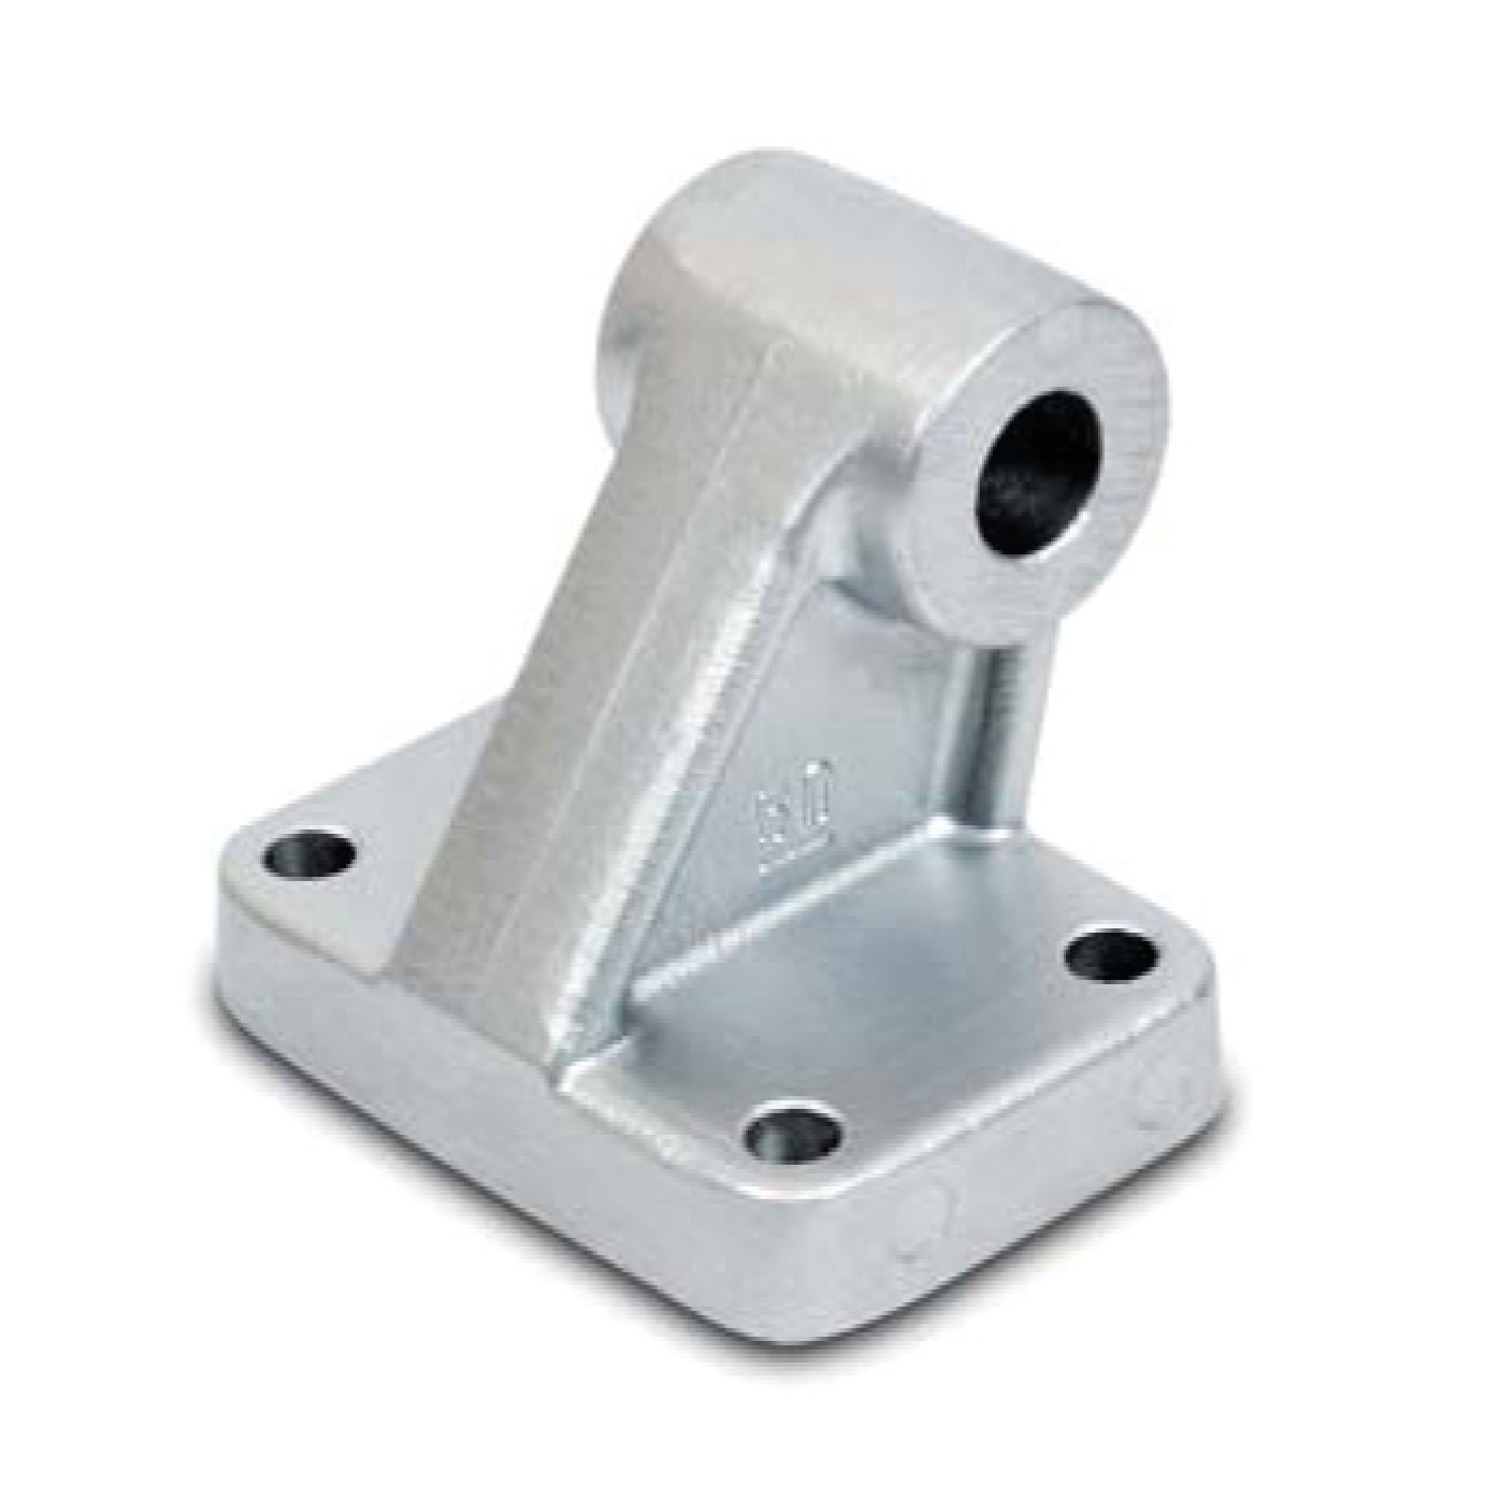 Product L4802, Air Cylinder Mounts - ISO Series clevis foot mounting / 